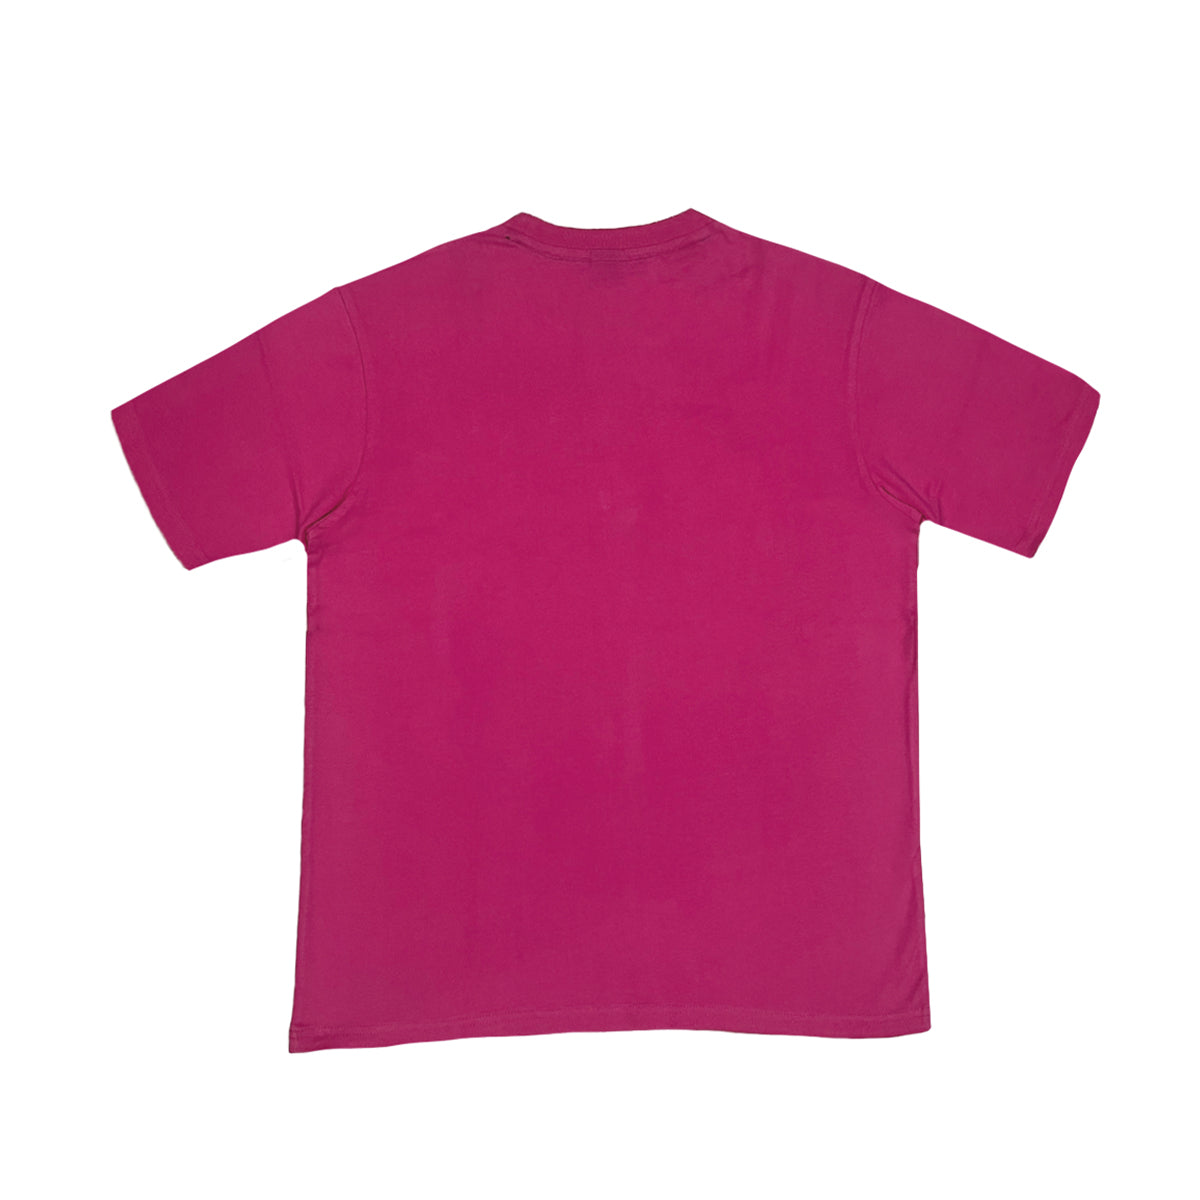 ESSENTIAL BOLD LOGO TEE - HOT PINK